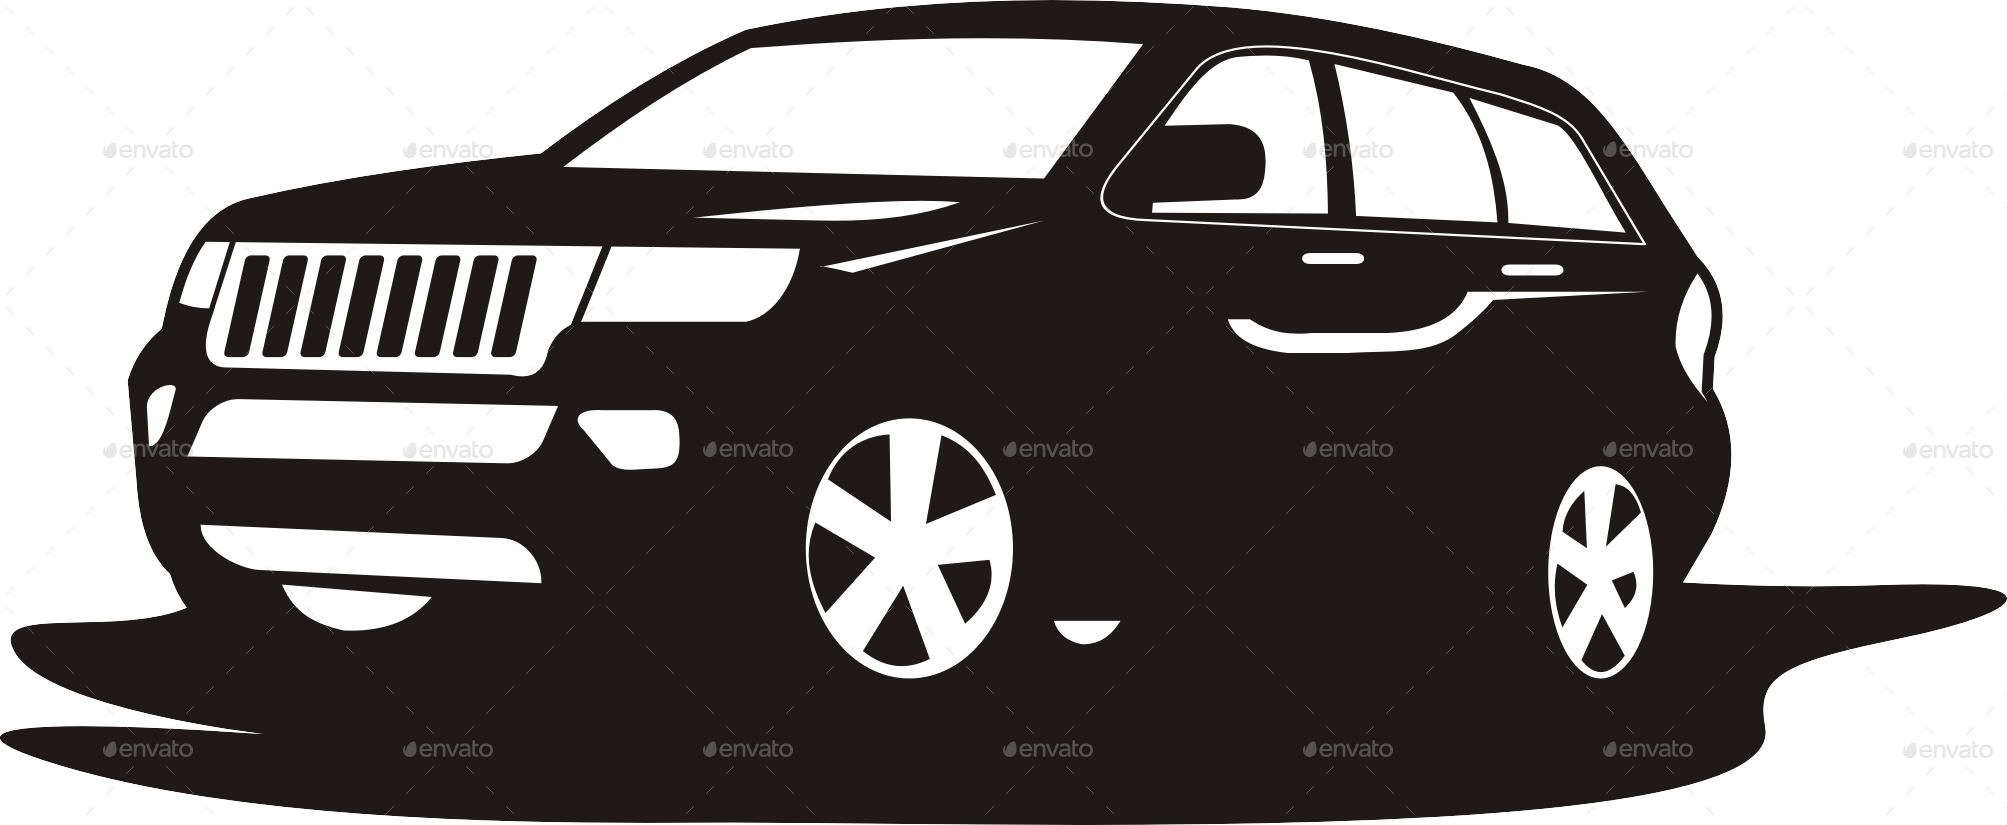 0 Result Images of Car Logo Png Hd - PNG Image Collection